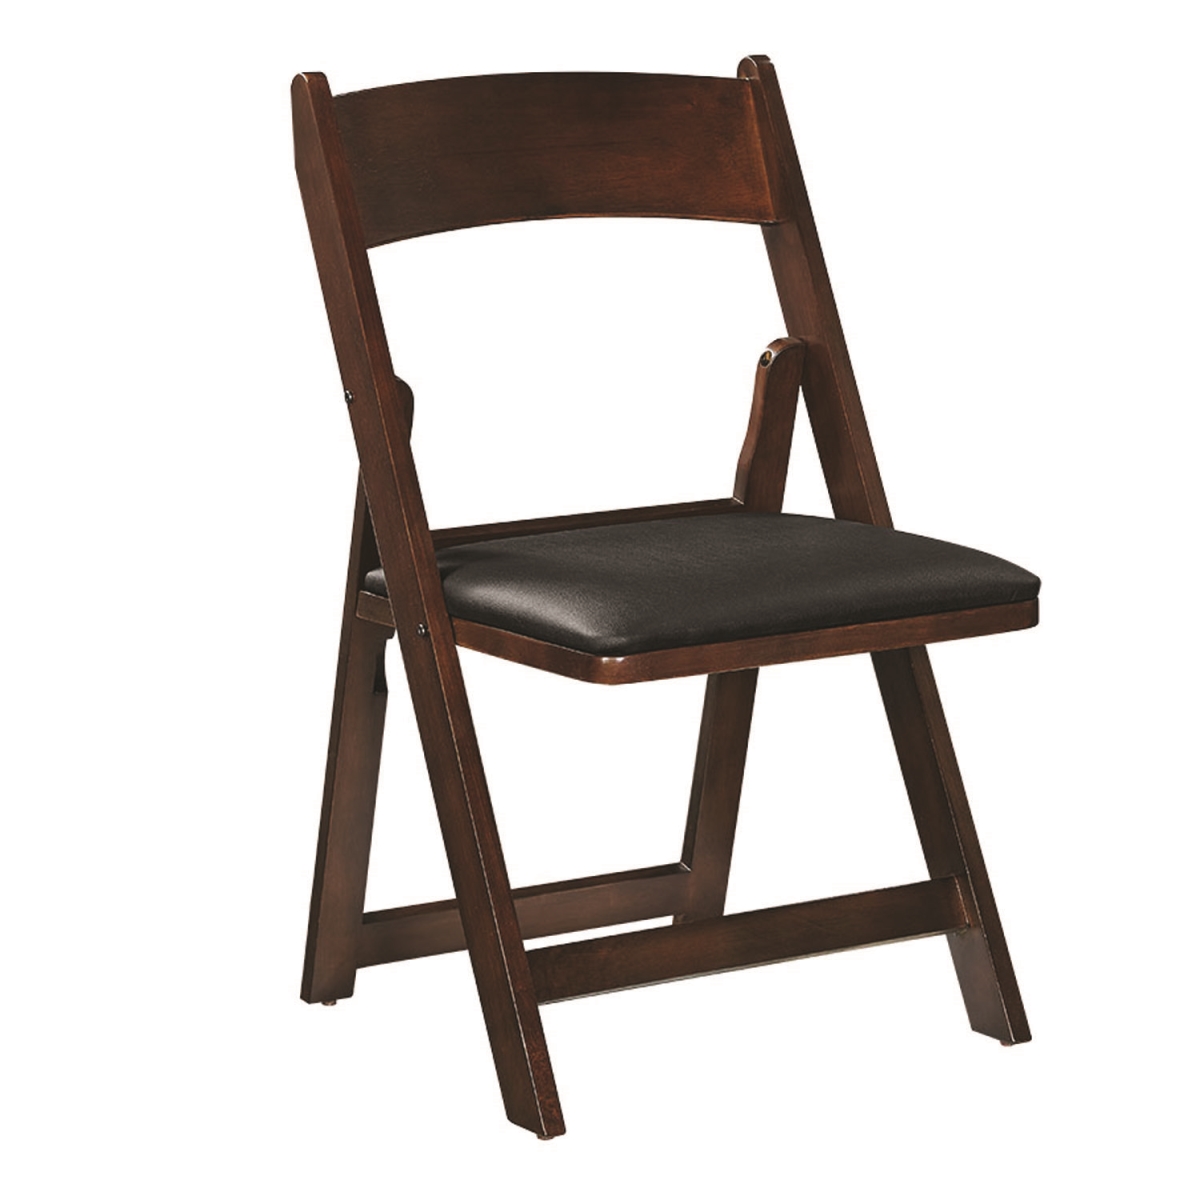 Picture of Ram Game Room GCHR4 CAP 21 x 19 x 33 in. Folding Game Chair - Cappuccino